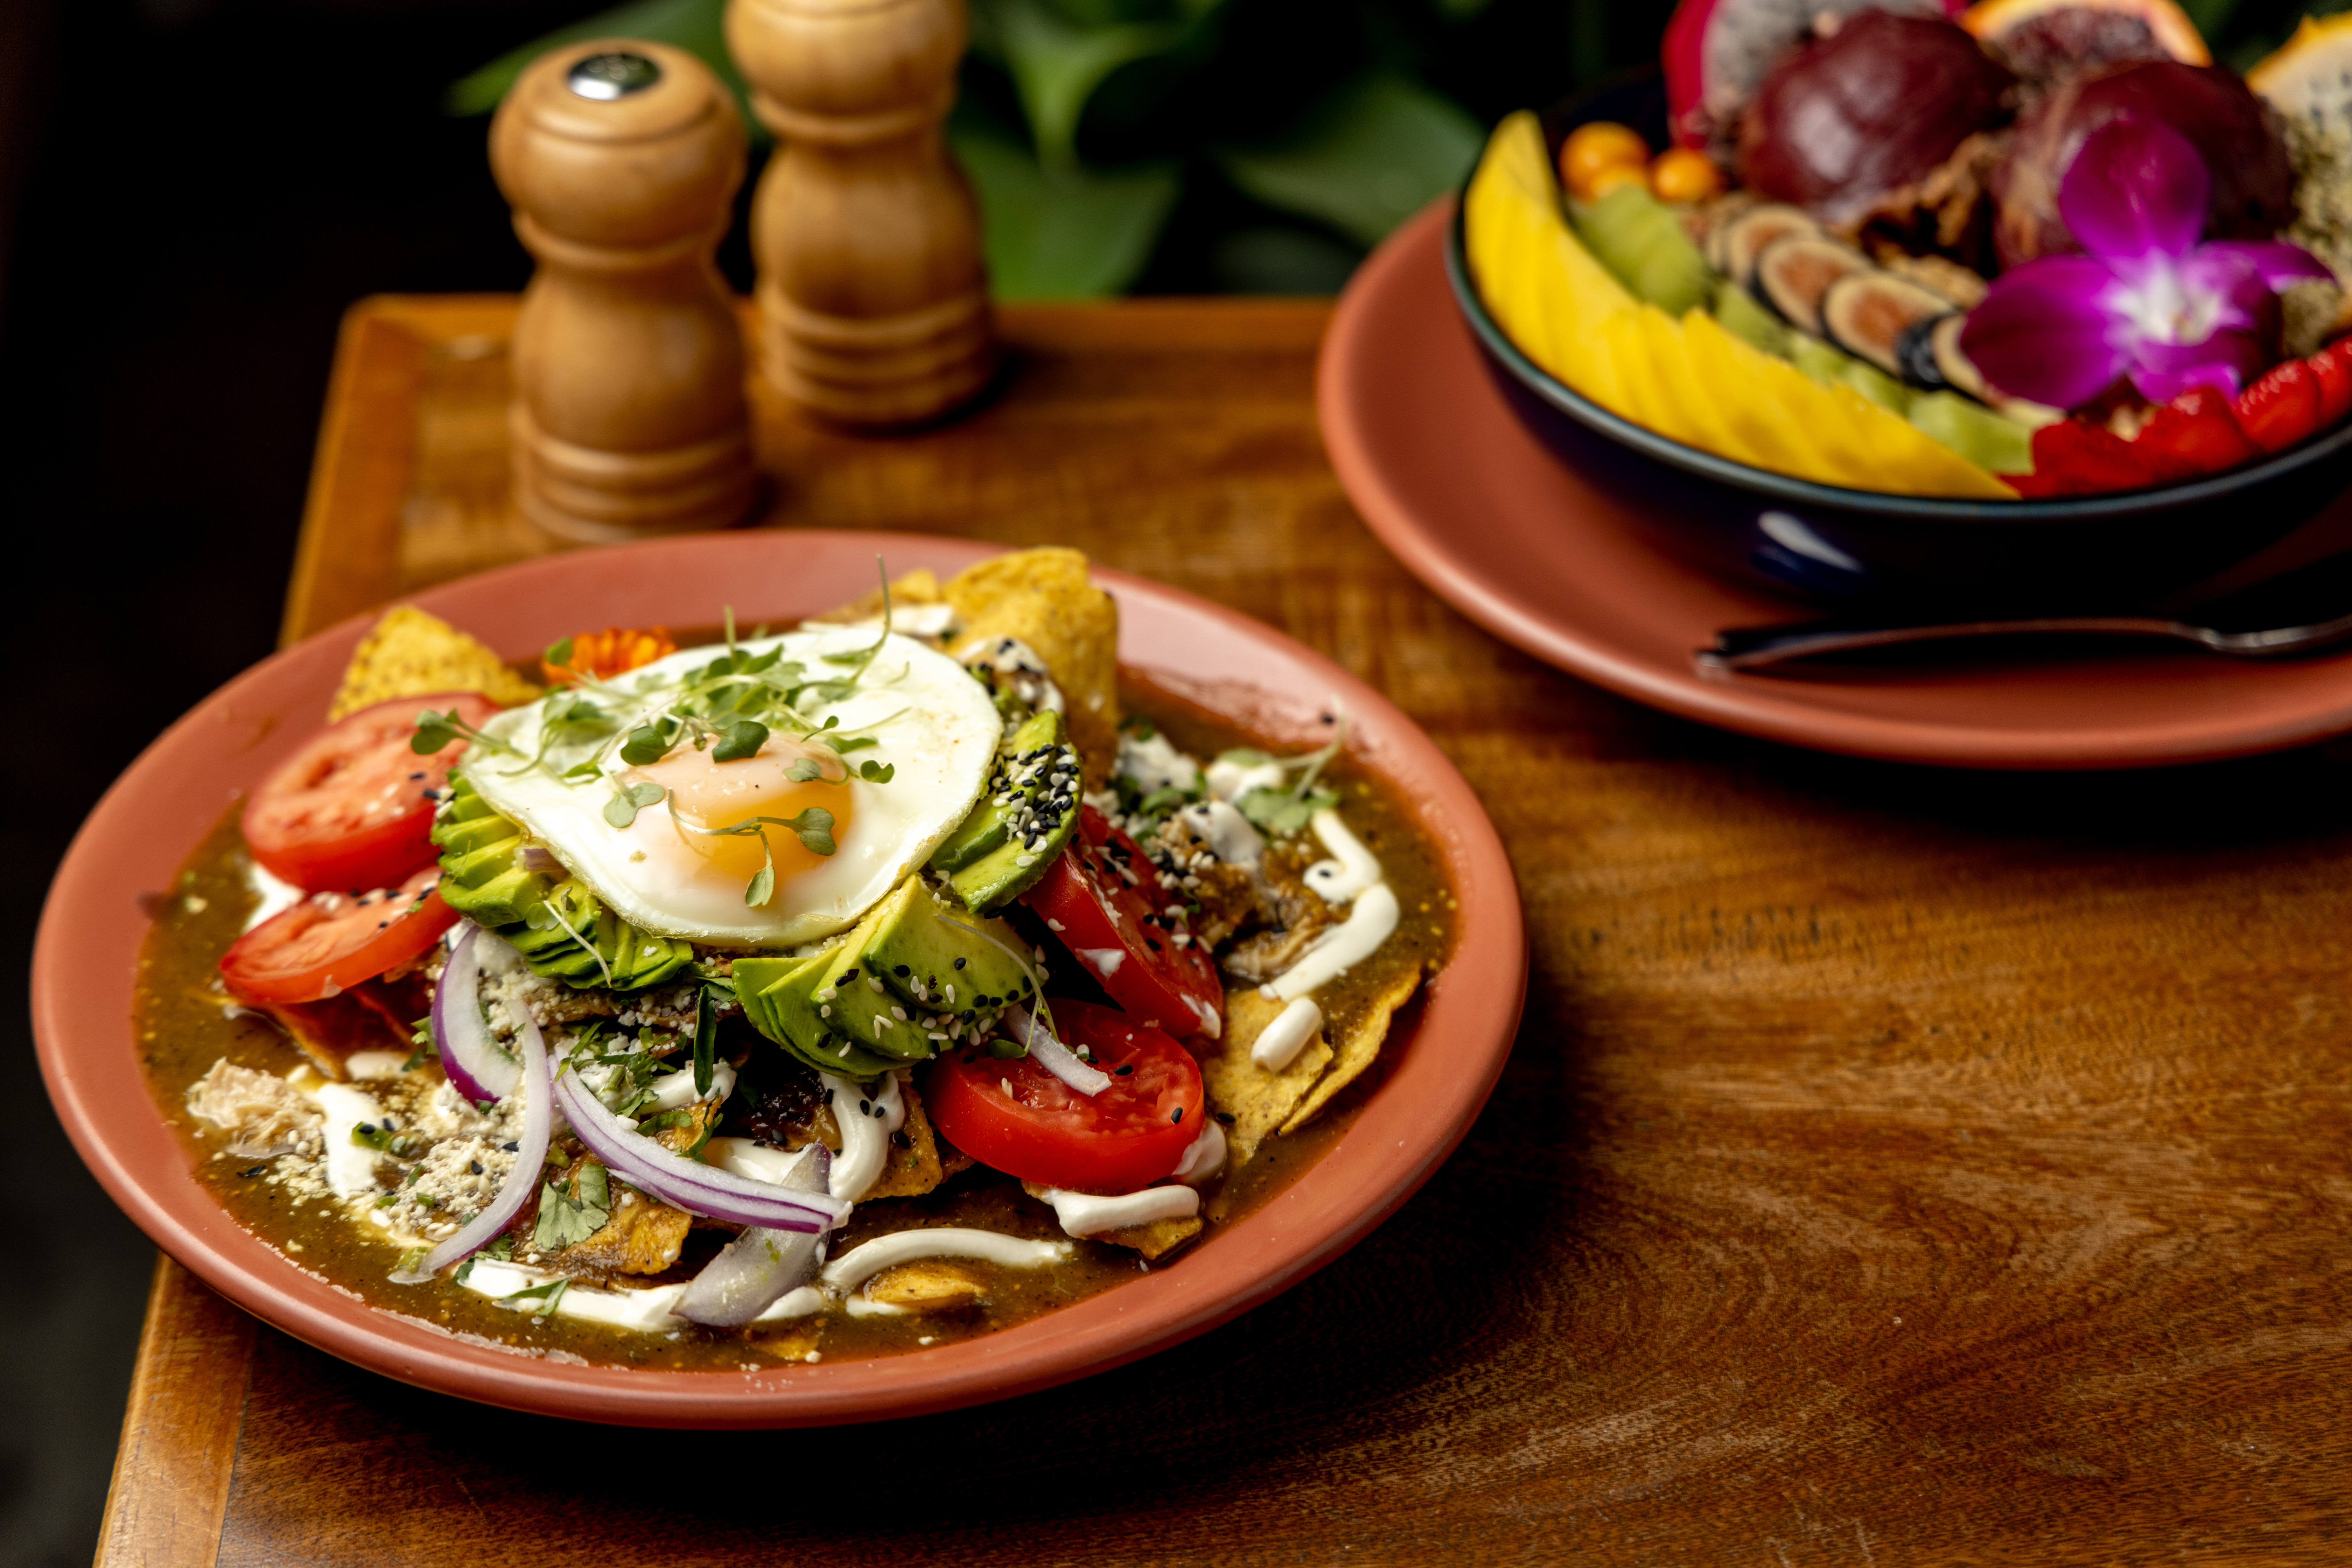 Ojo de Agua’s chilaquiles topped with a fried egg, cilantro, onions, and verde salsa, with an acai bowl topped with fresh fruit on the side.